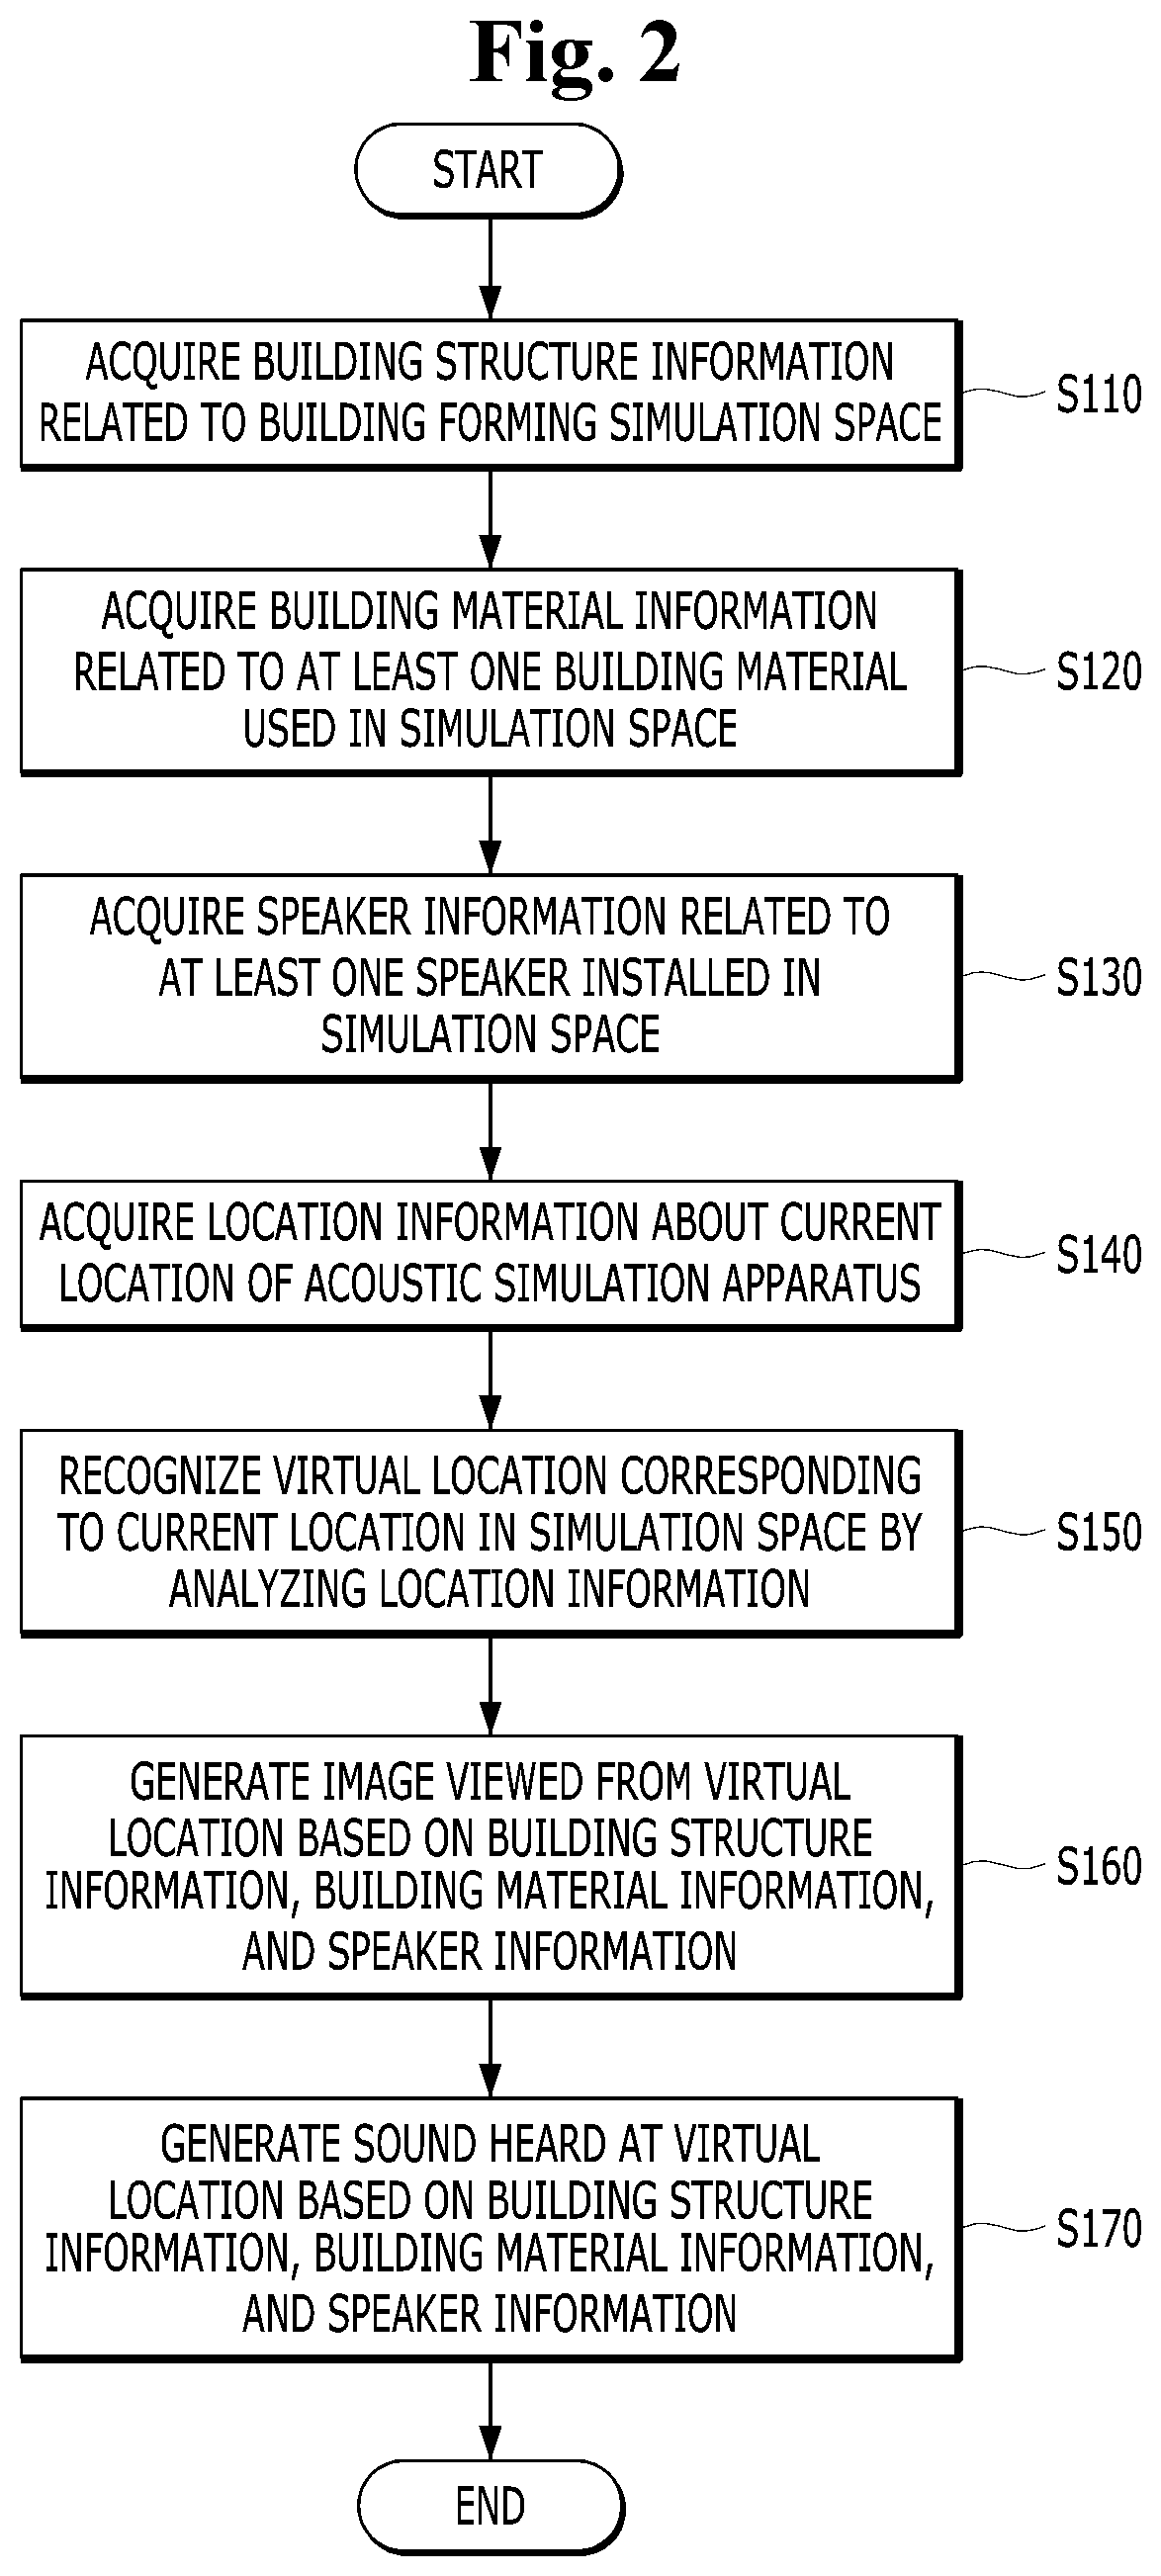 Augmented reality based simulation apparatus for integrated electrical and architectural acoustics